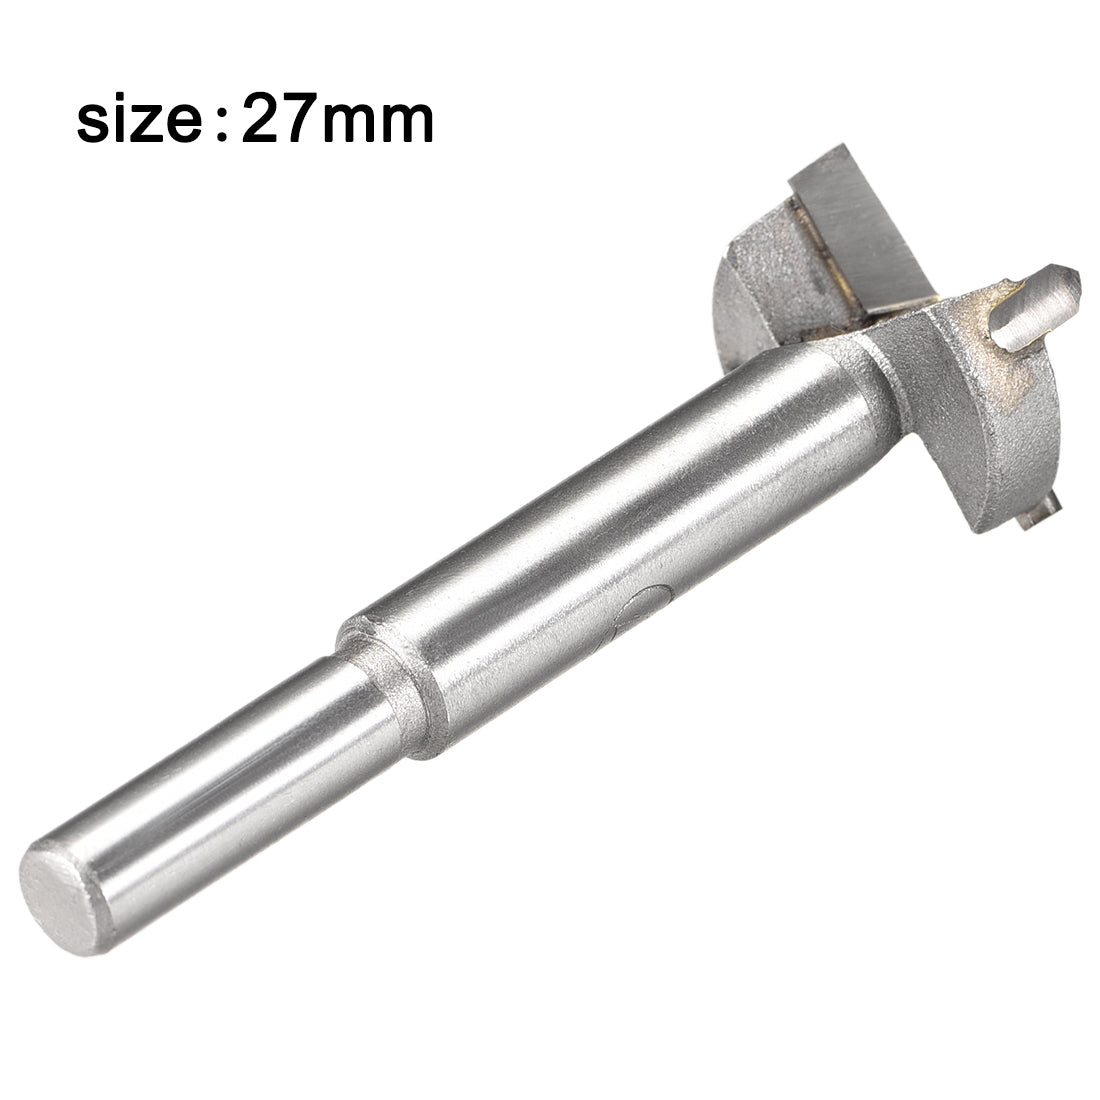 uxcell Uxcell Forstner Wood Boring Drill Bit 27mm Dia. Hole Saw Carbide Alloy Steel Tip Round Shank Cutting for Hinge Plywood Wood Tool